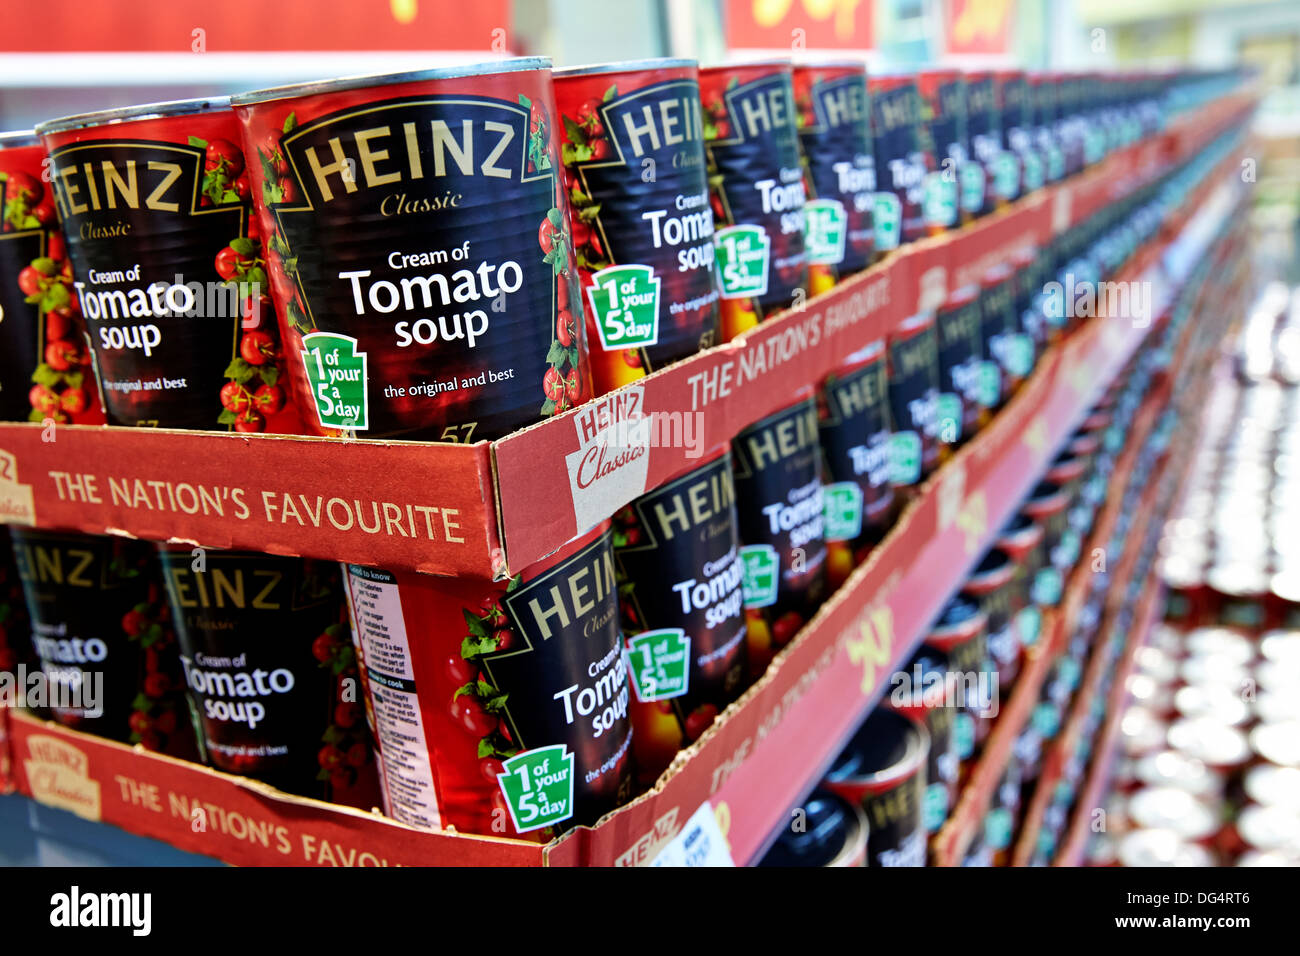 Heinz tomato soup tins on sale in a supermarket Stock Photo